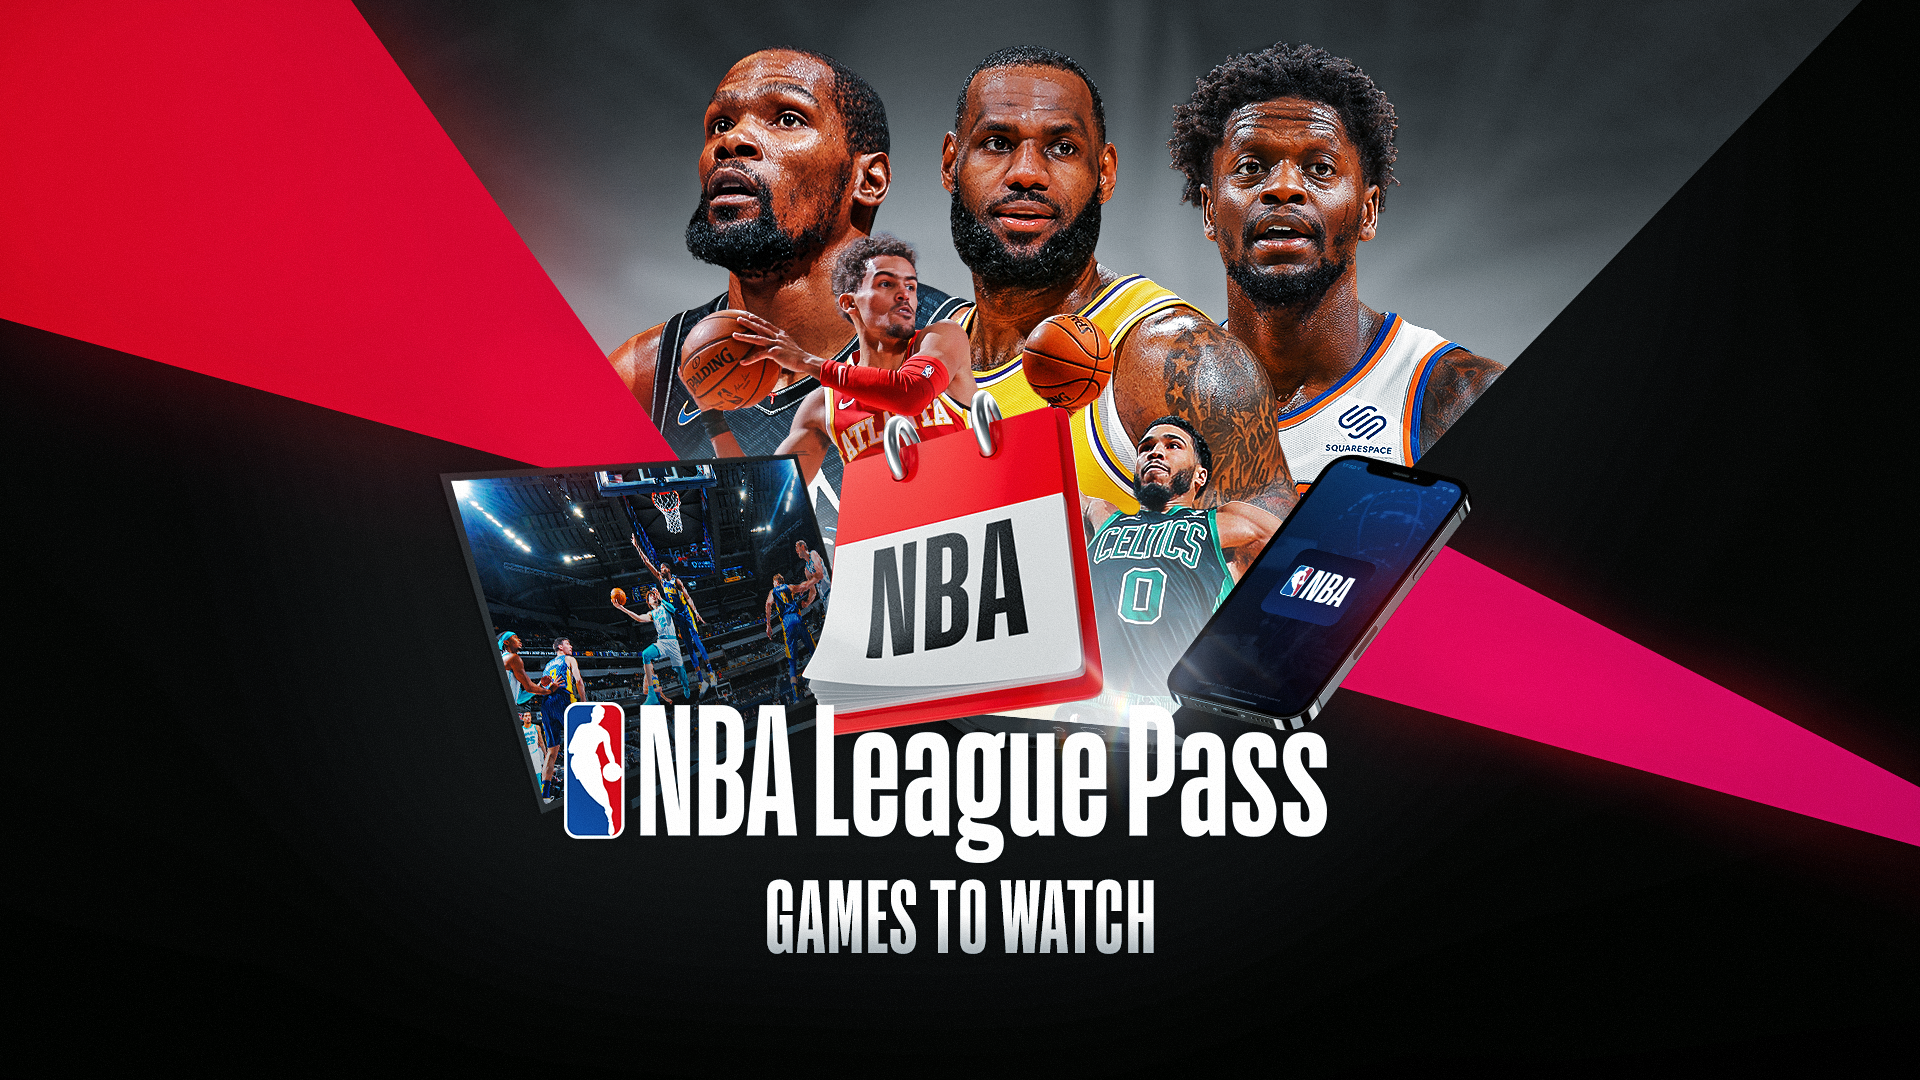 Can you watch out-of-market games with NBA League Pass?